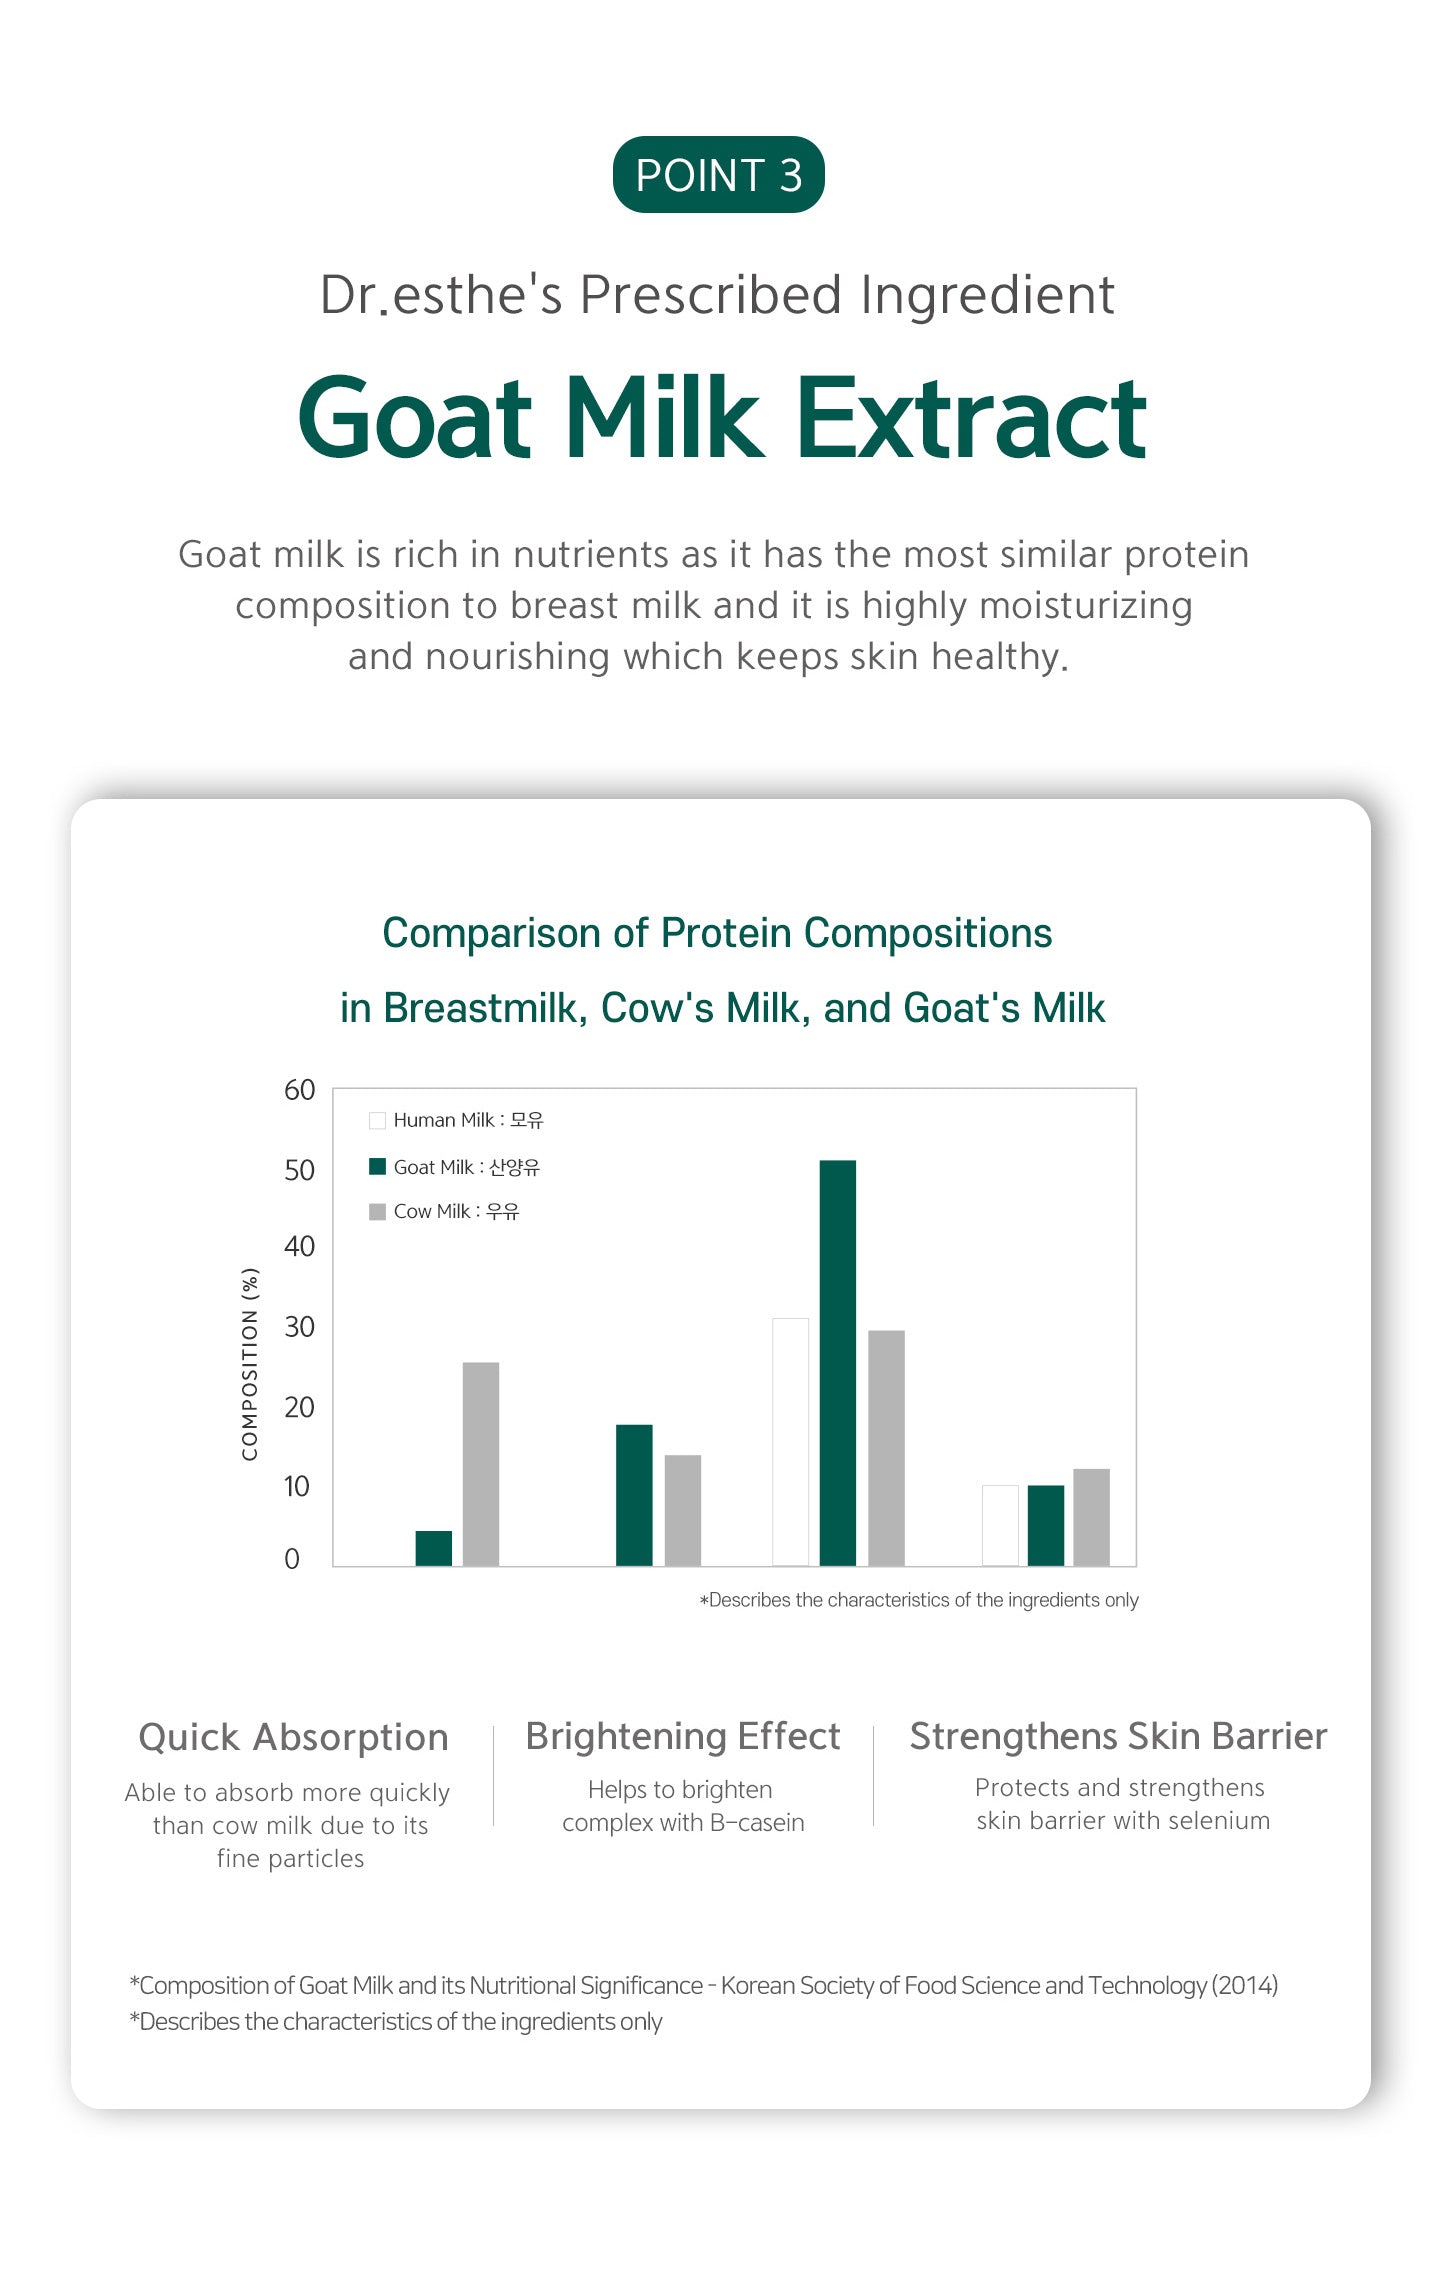 Dr.esthe's prescribed ingredient goat milk extract. Goat milk is rich in nutrients as it has the most similar protein composition to breast milk and it is highly moisturizing and nourishing which keeps skin healthy.